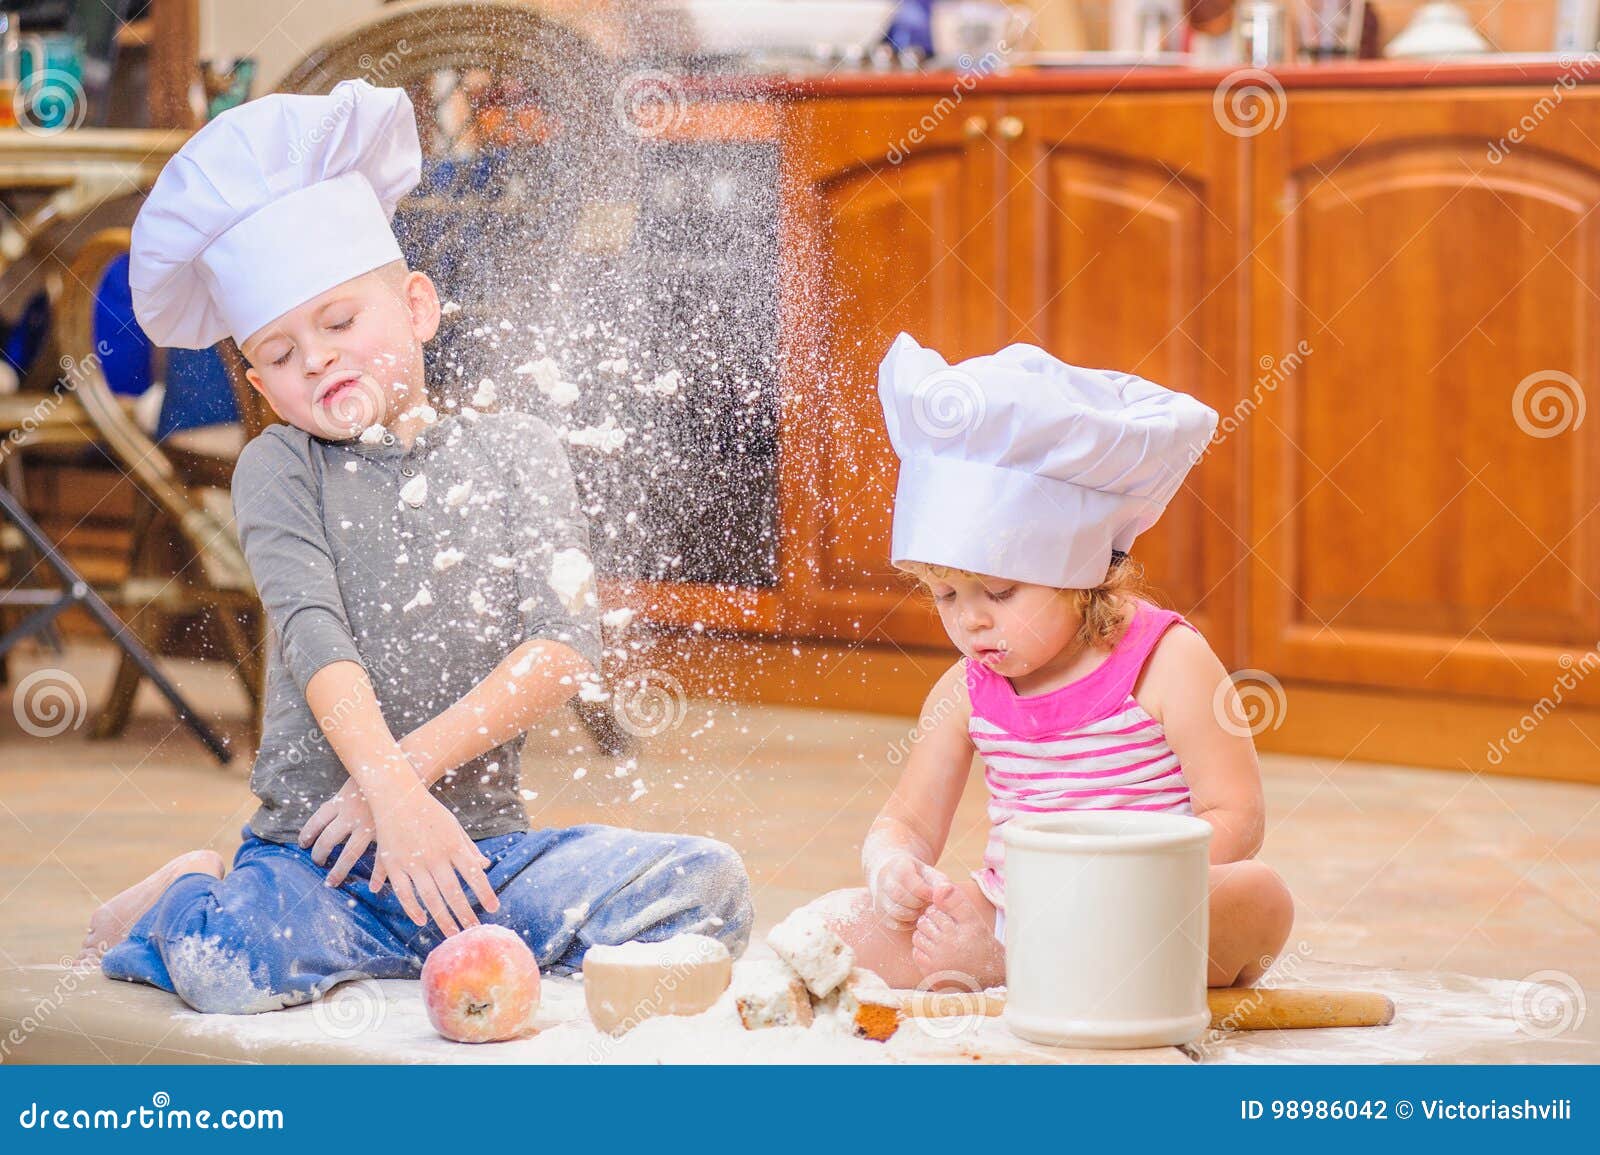 two siblings - boy and girl - in chef`s hats sitting on the kitchen floor soiled with flour, playing with food, making mess and ha